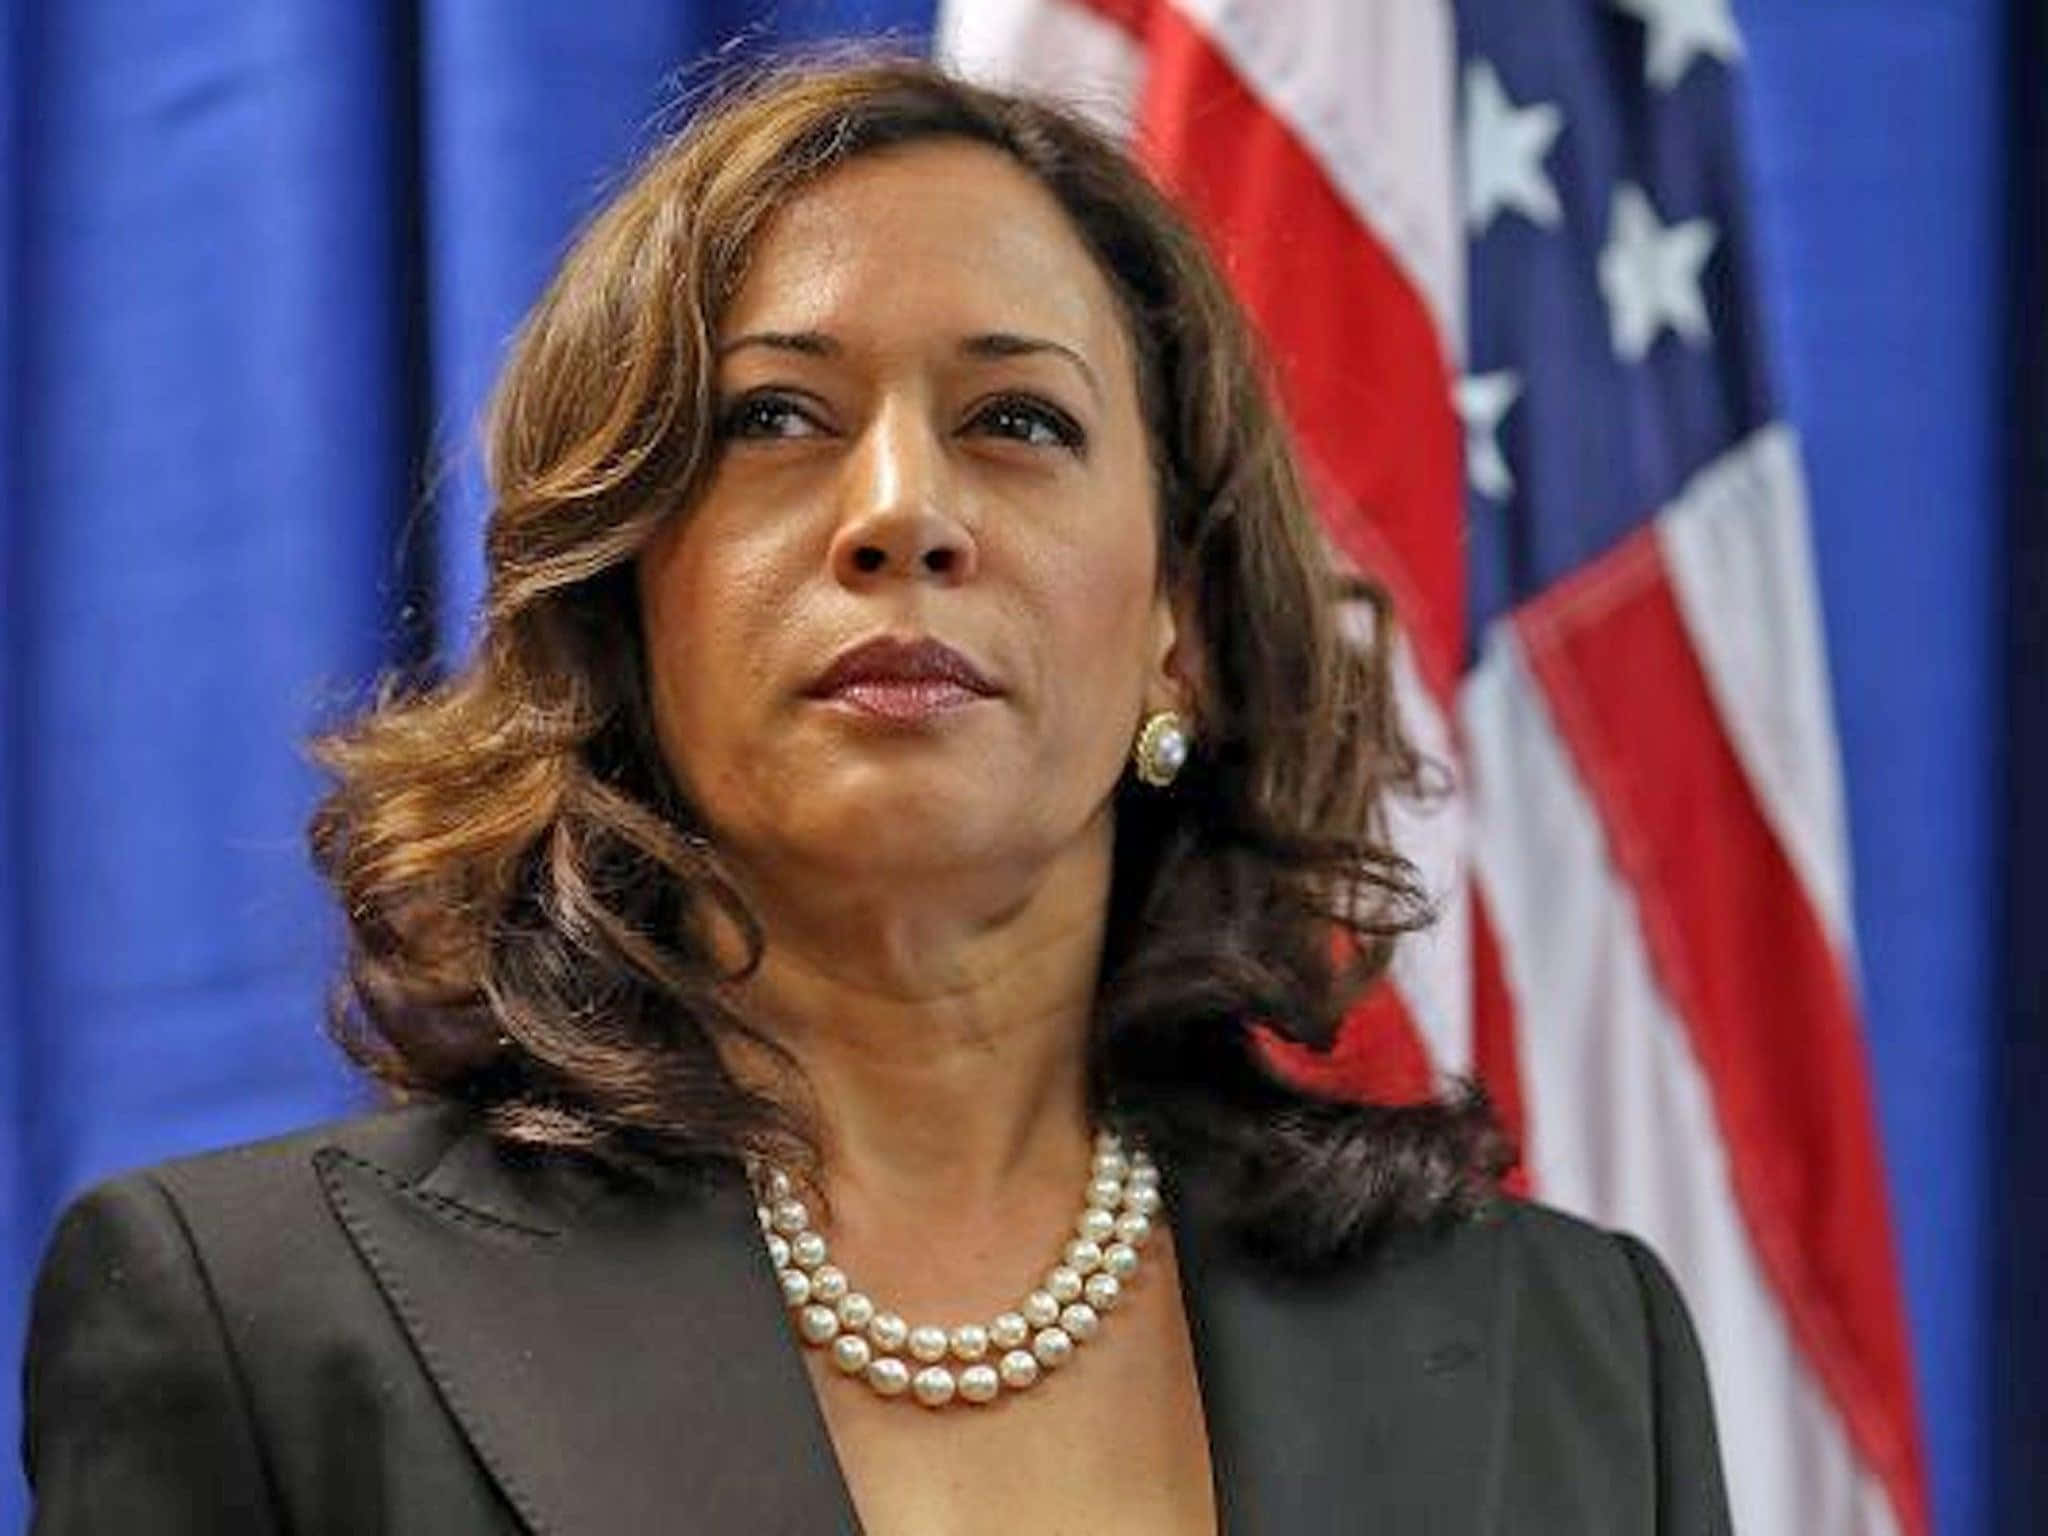 Vice President Kamala Harris Smiling in Official Portrait